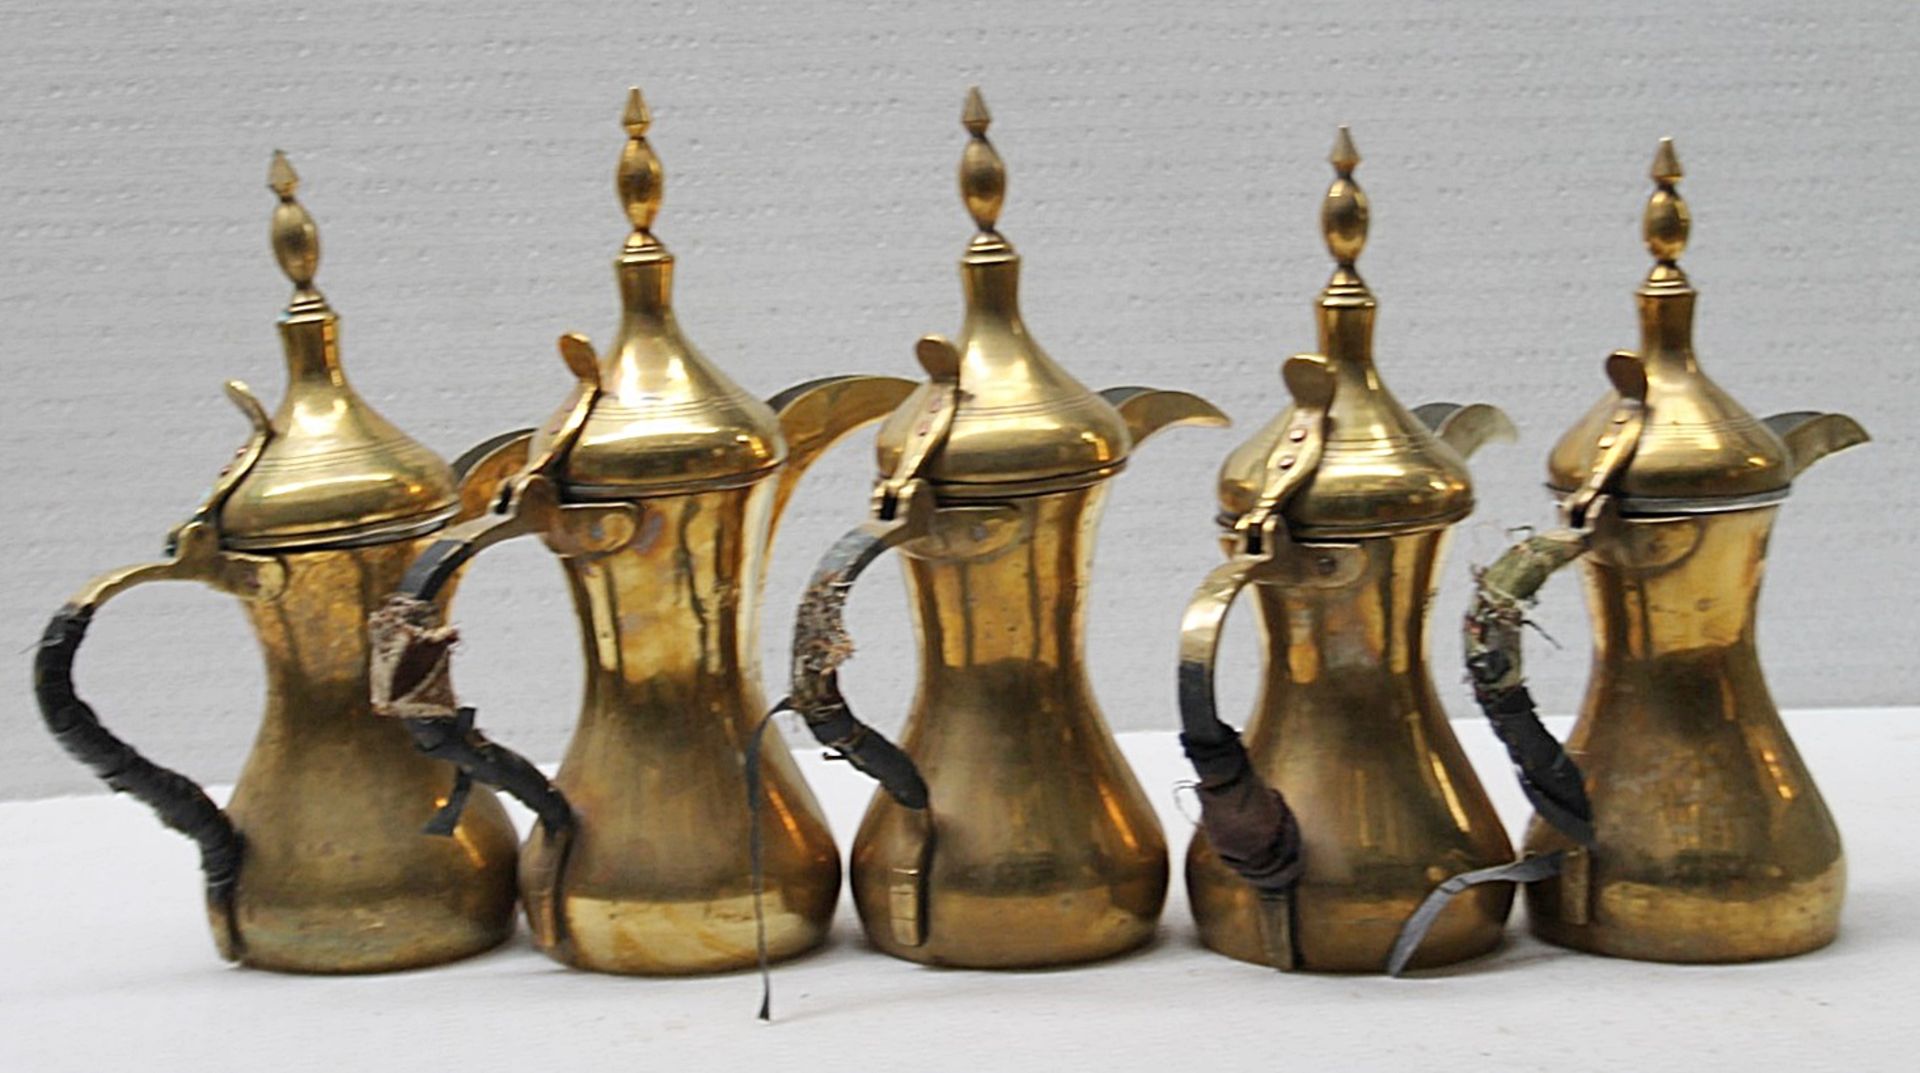 5 x Vintage Brass Arabic Dallah Coffee Pots - Recently Removed From A Well-known London Department - Image 5 of 5